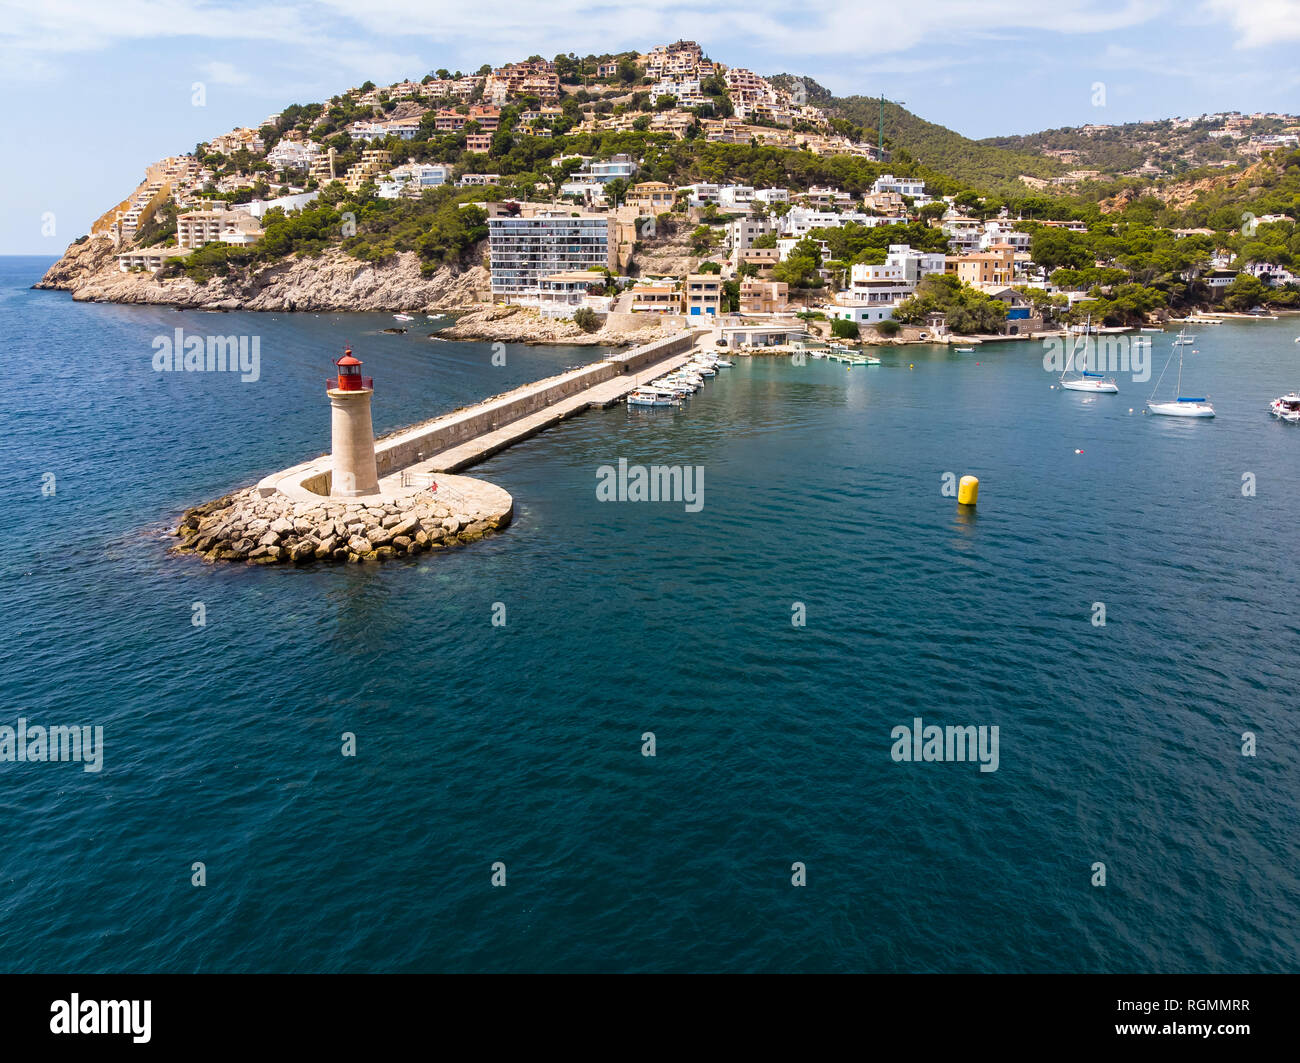 Spain, Balearic Islands, Mallorca, Andratx Region, Aerial view of Port d'Andratx, coast and natural harbour with lighthouse Stock Photo